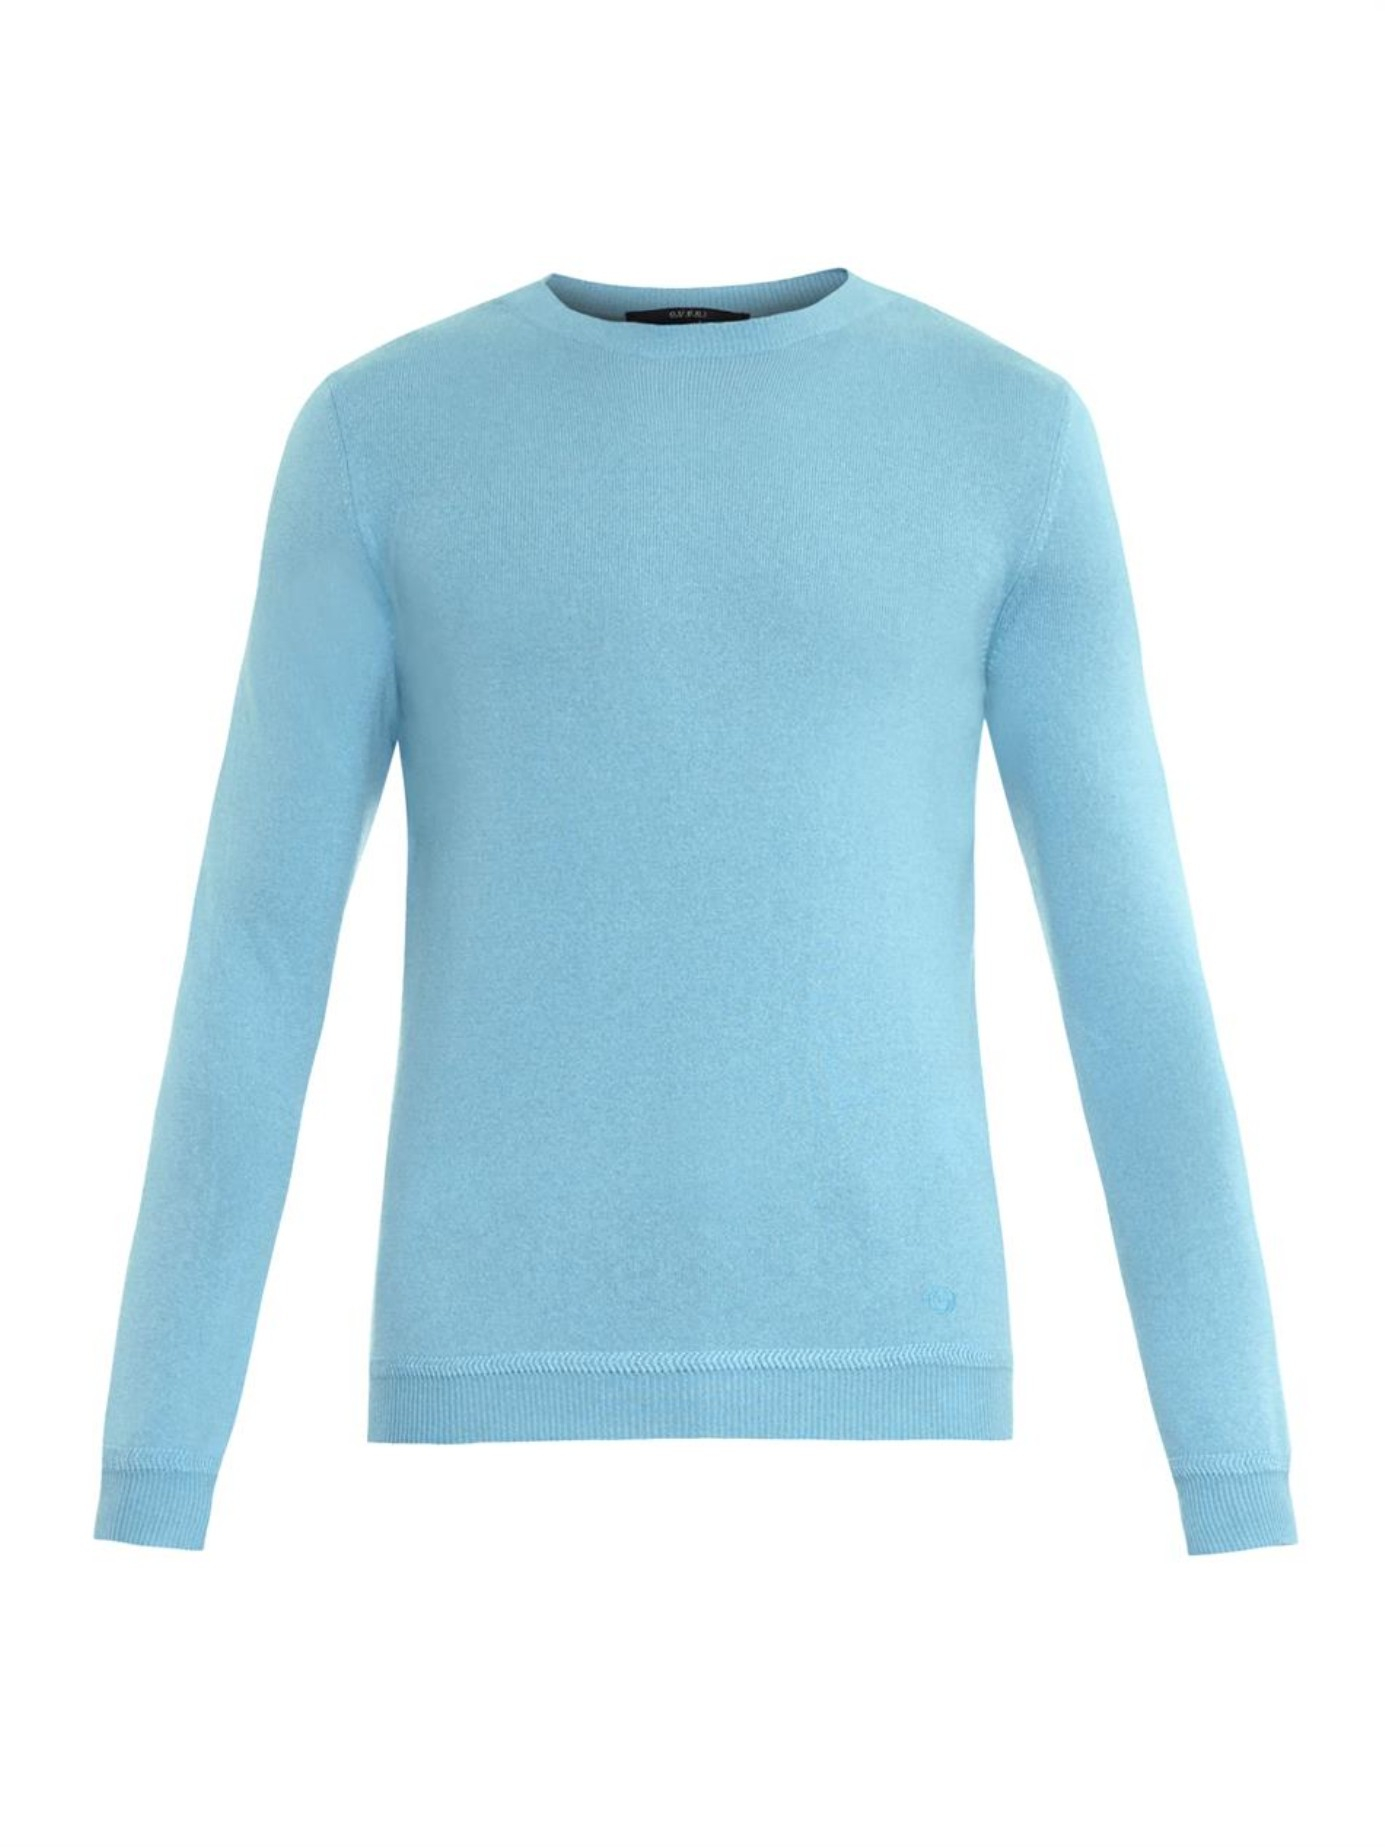 Gucci Crew-neck Cashmere Sweater in Blue for Men | Lyst